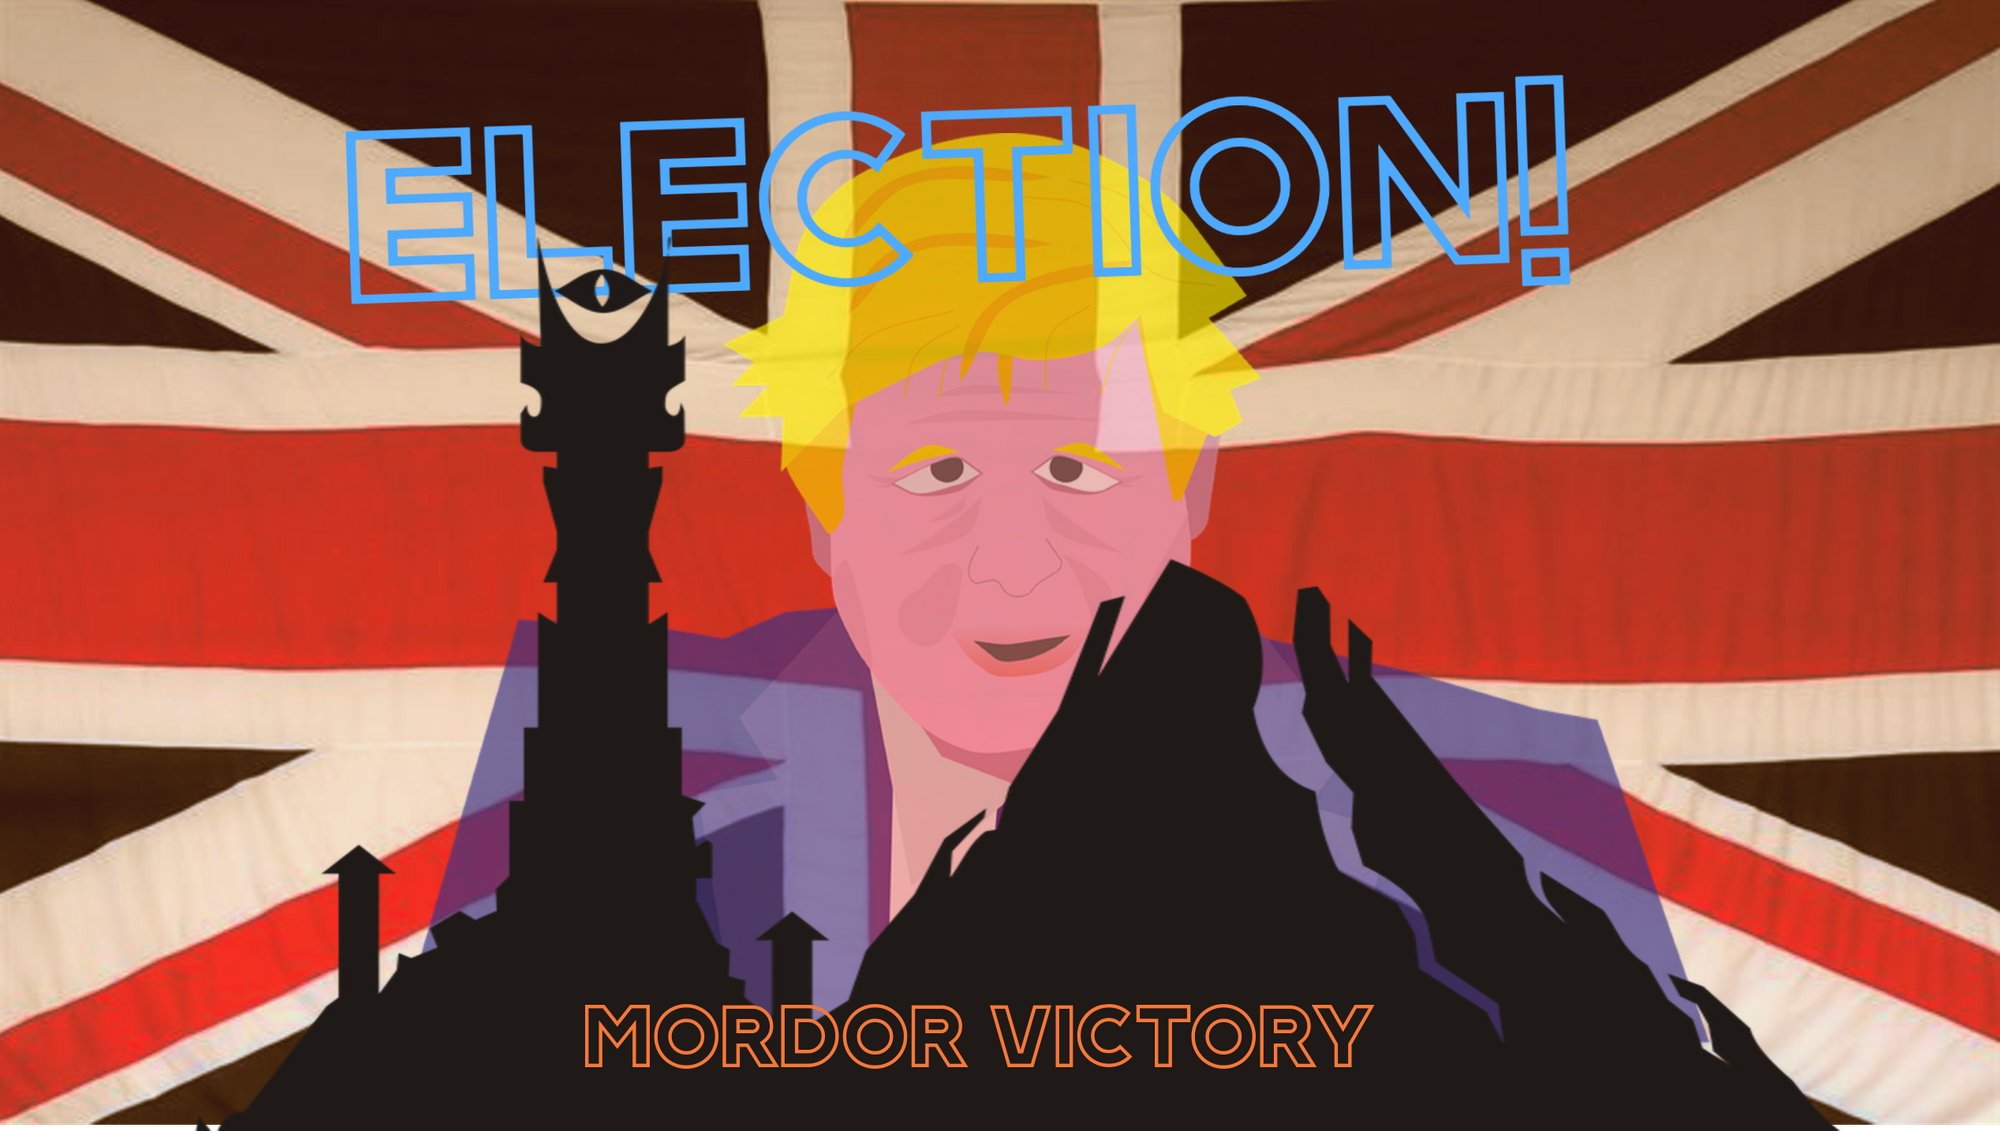 Sauron the Deceiver to win Biggest Middle-Earth Majority since Morgoth